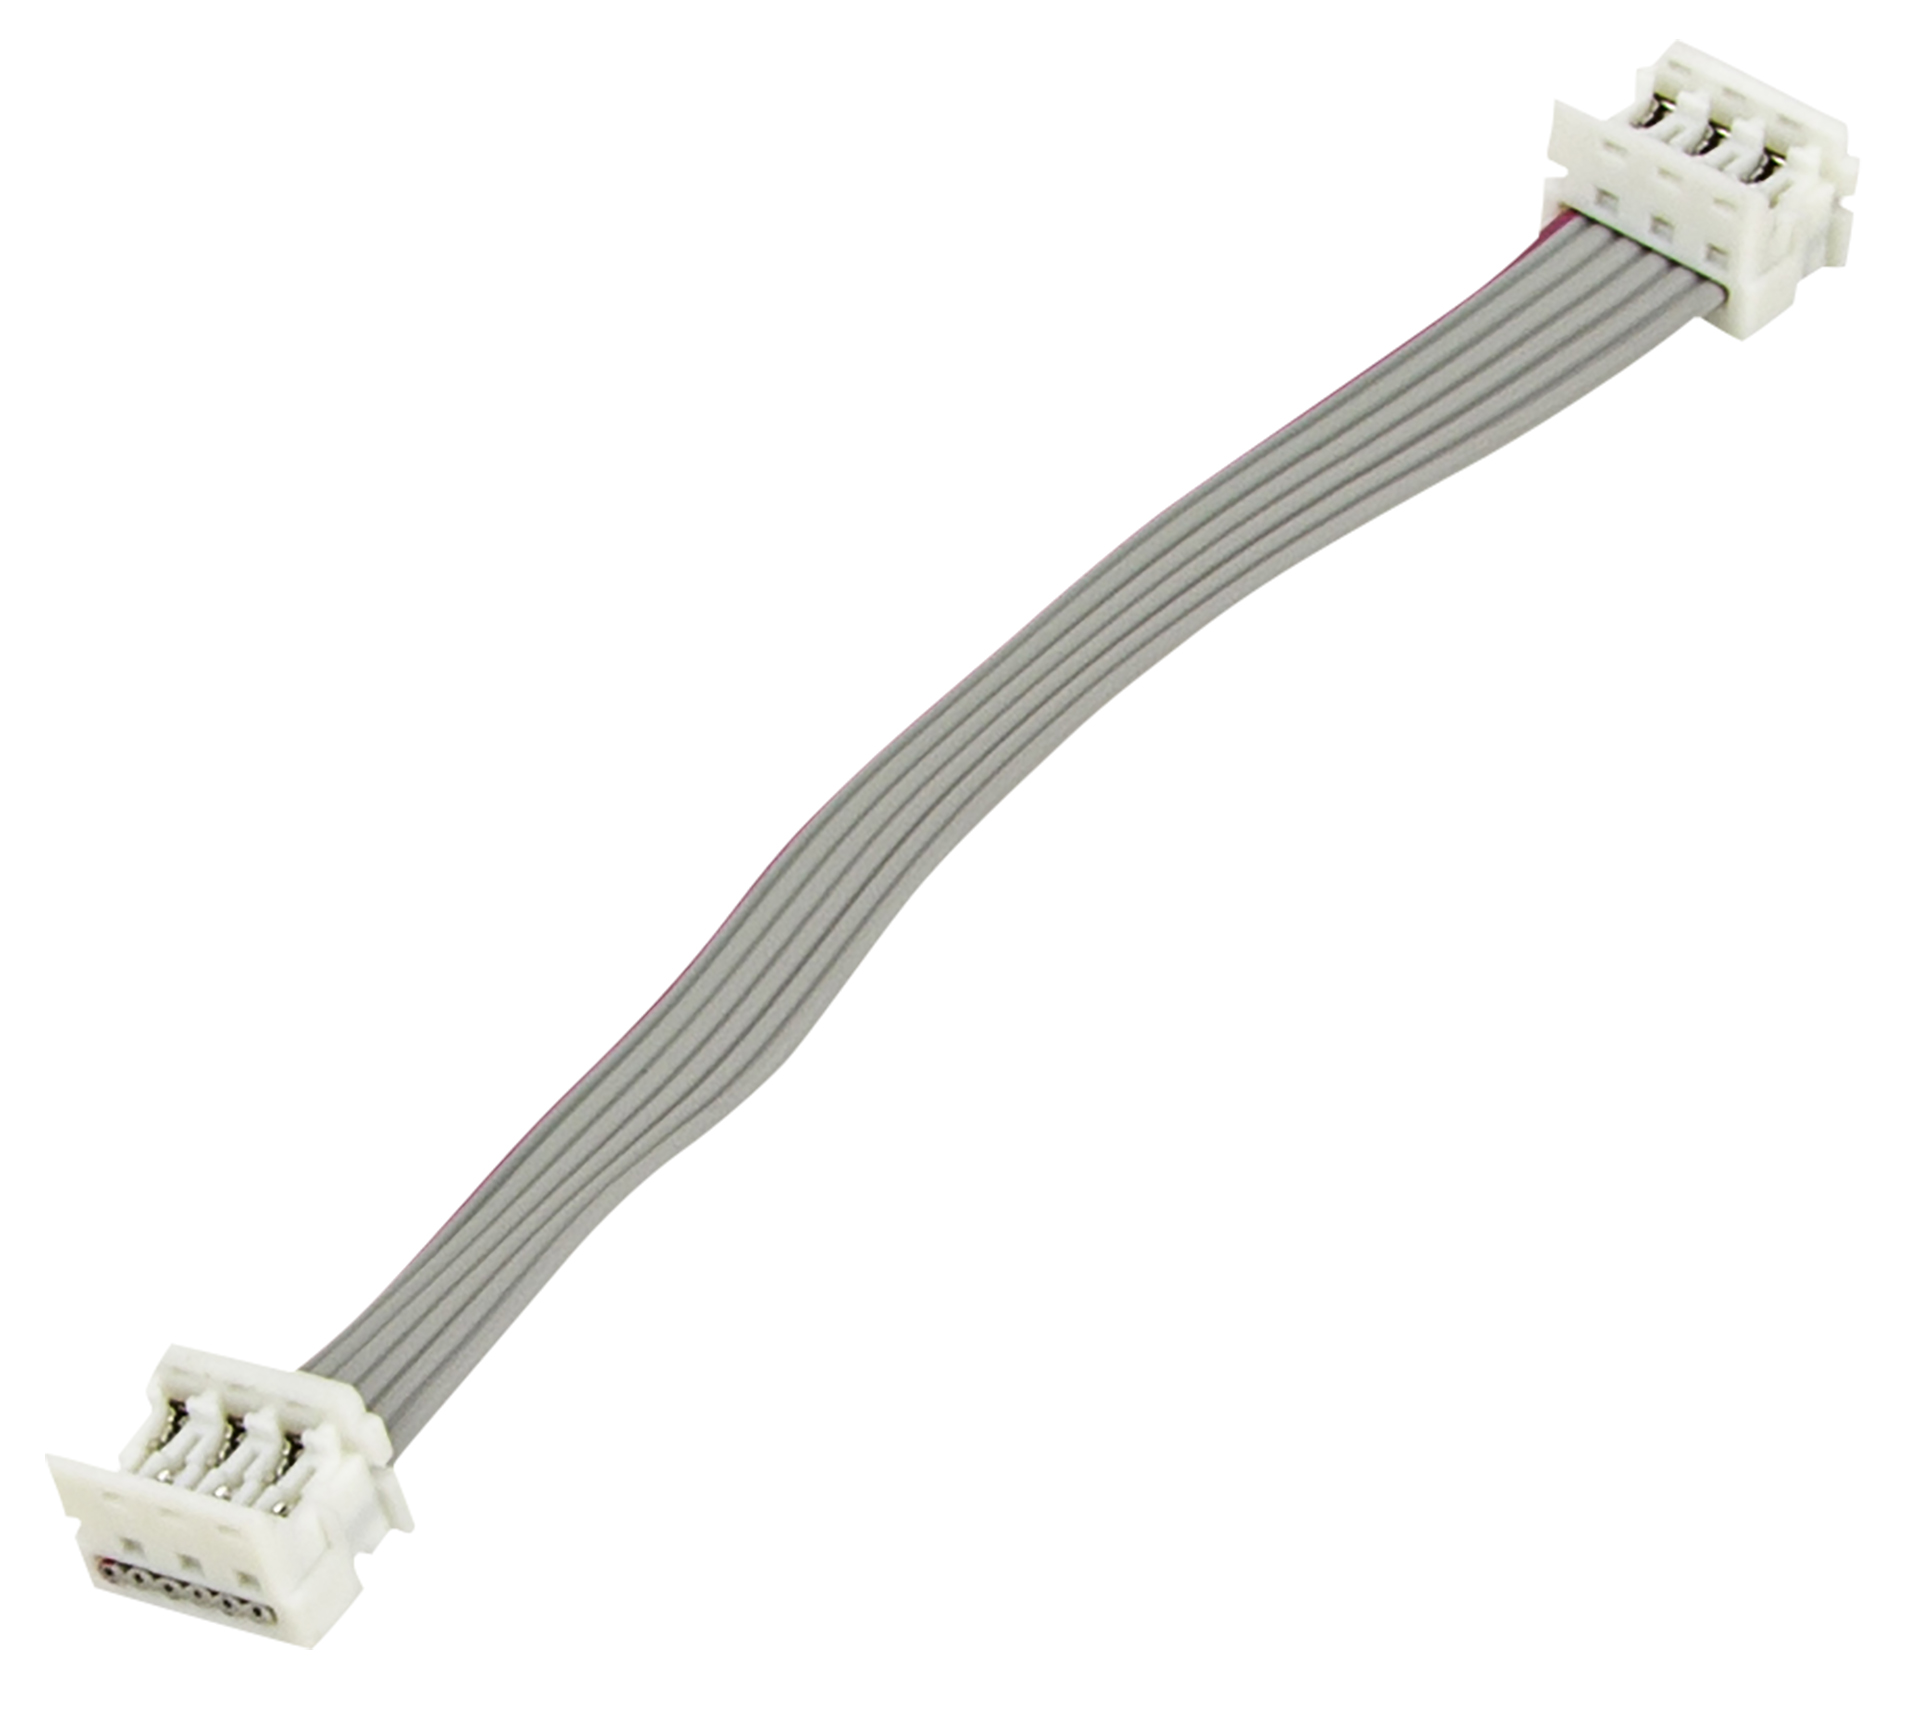 Warwick Parts - Flatcable for Warwick Electronics, 100 mm